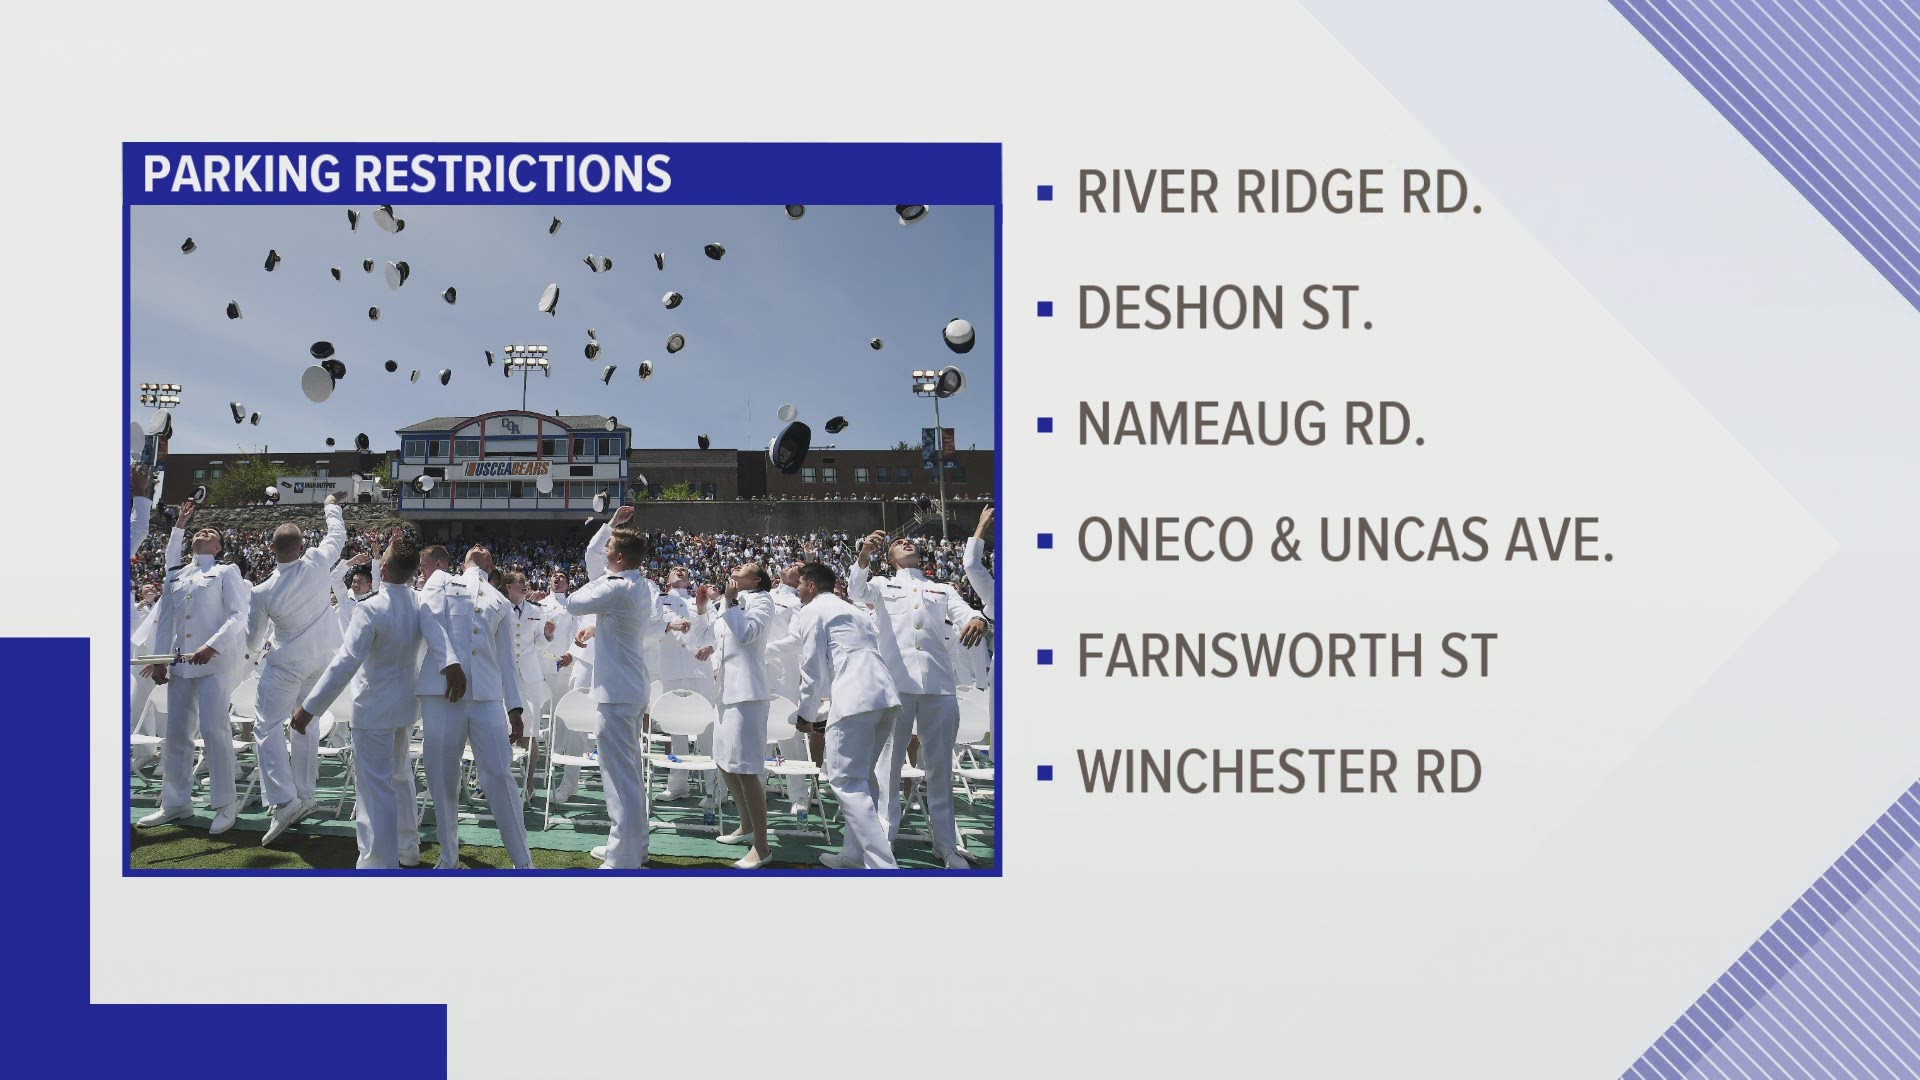 As the city of New London continues preparing for graduation, police say several parking restrictions will be in effect Wednesday.